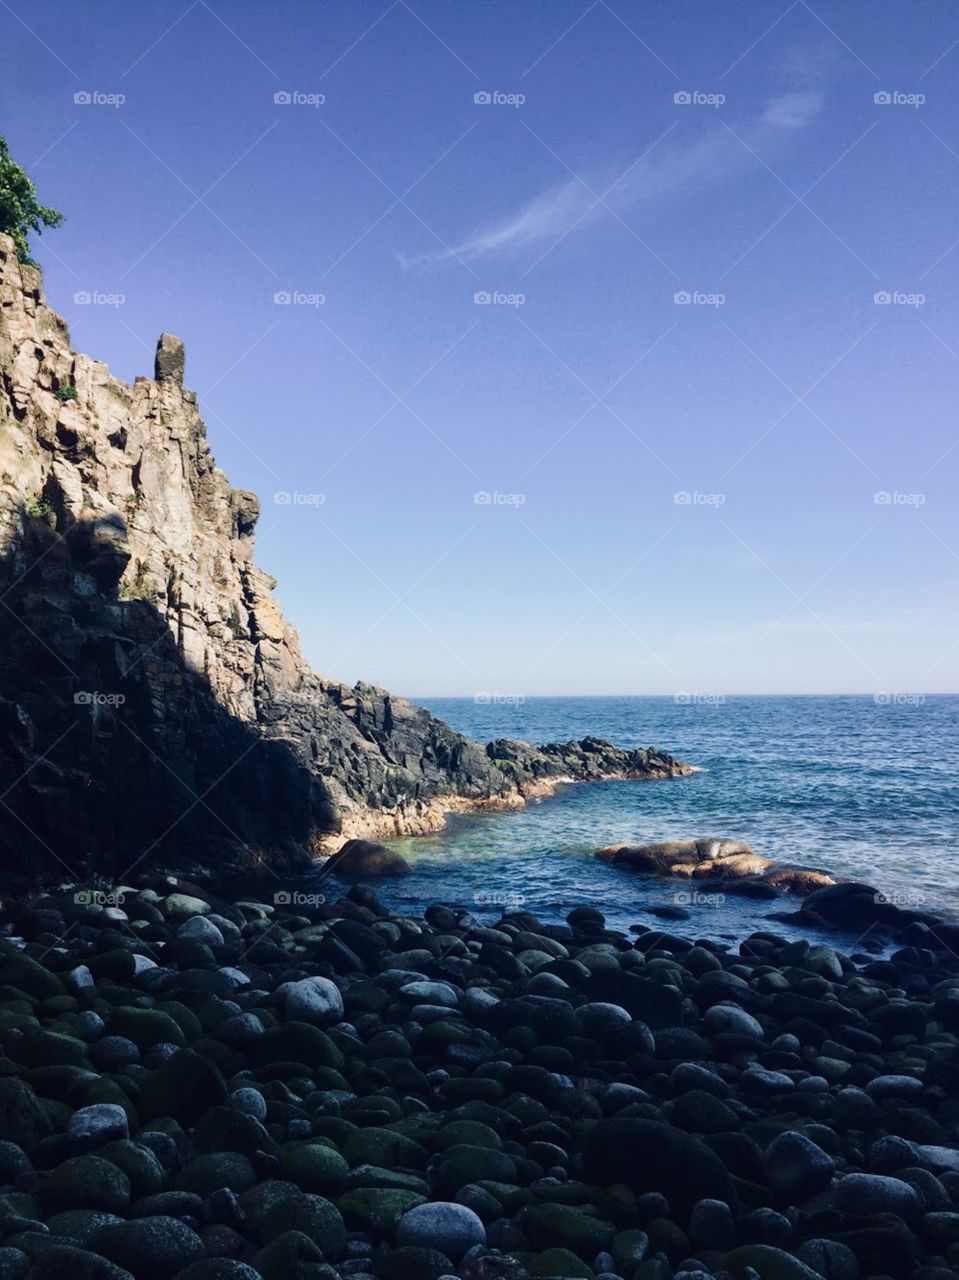 Rocky shore overlooking the blue, Baltic Sea off the island of Bornholm. Cliffs with trees tower over the beach. 